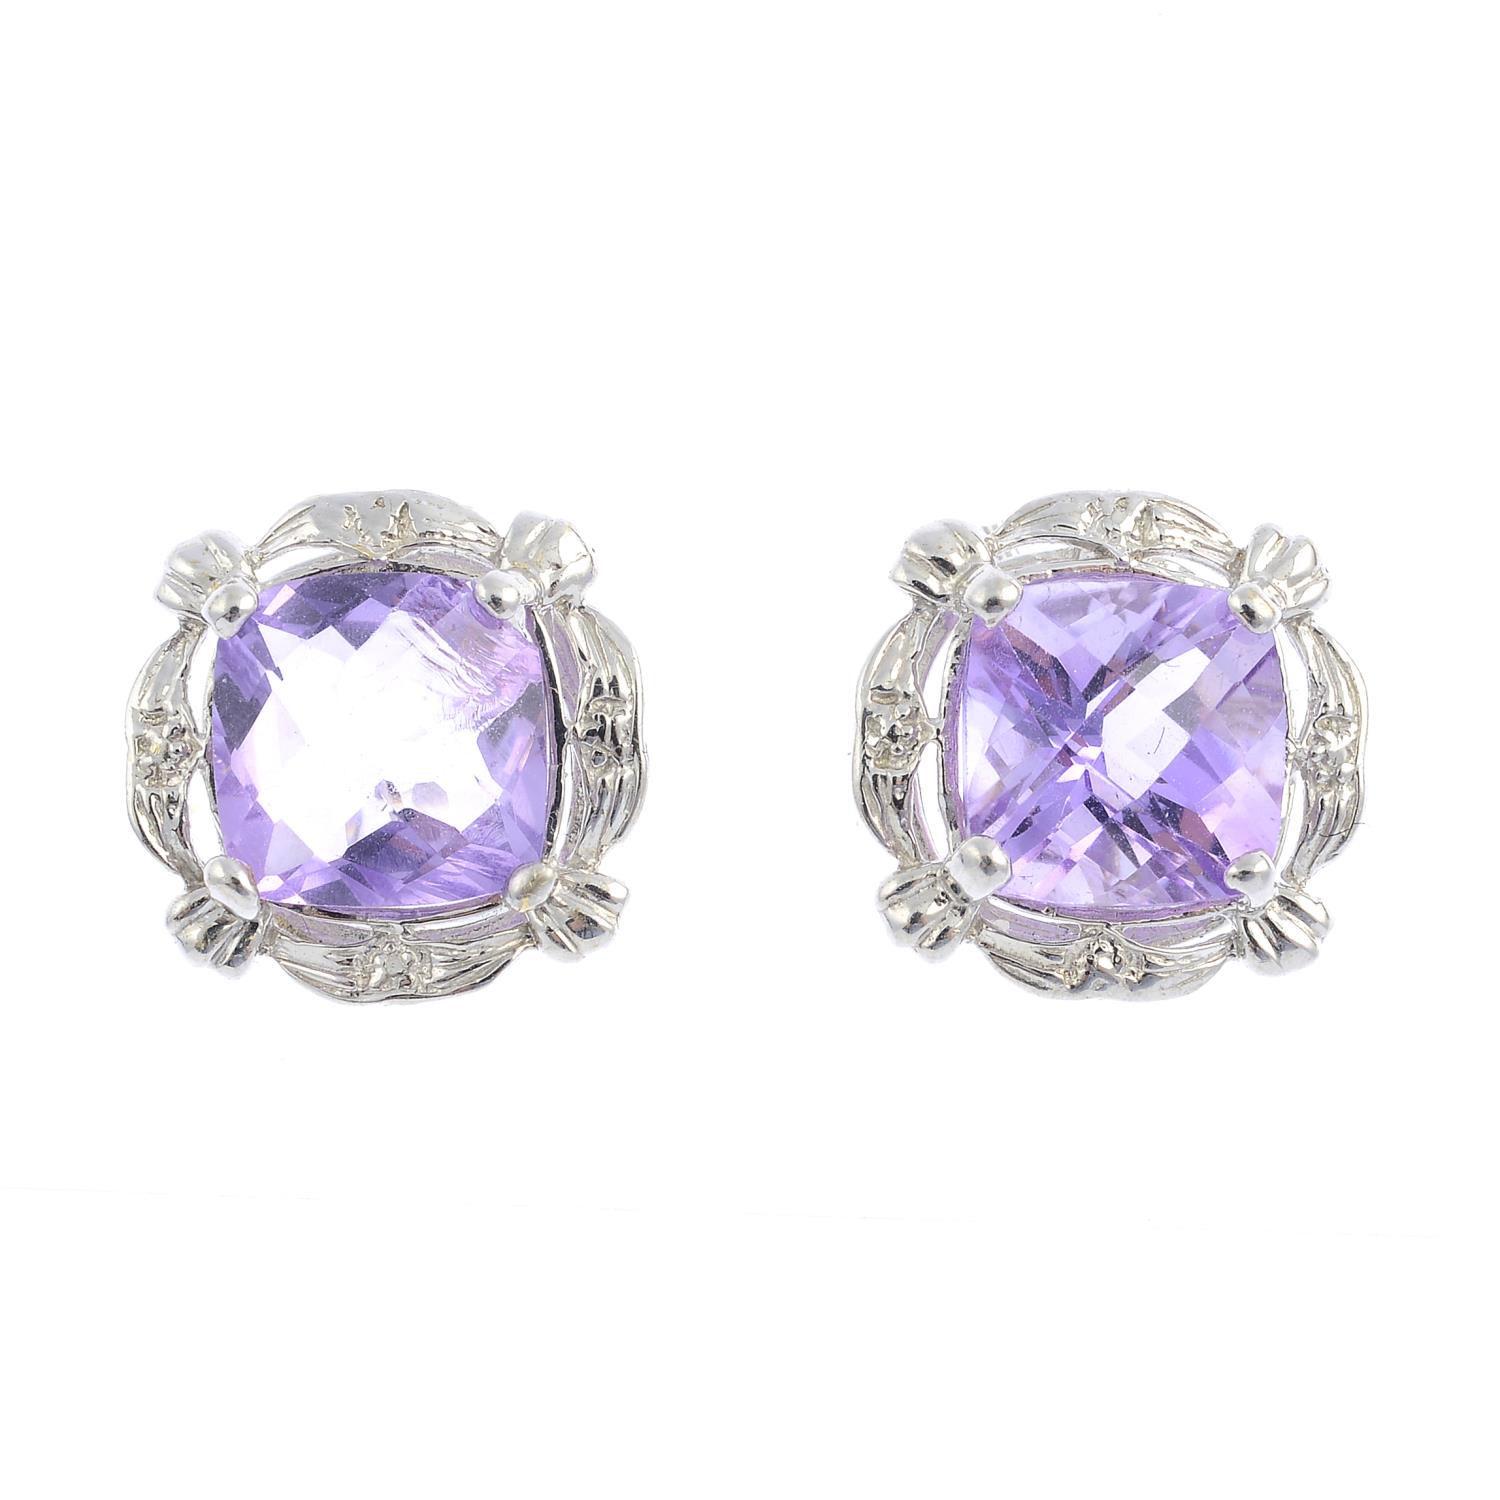 A pair of amethyst earrings. Each designed as a cushion-shape amethyst, within a grooved openwork